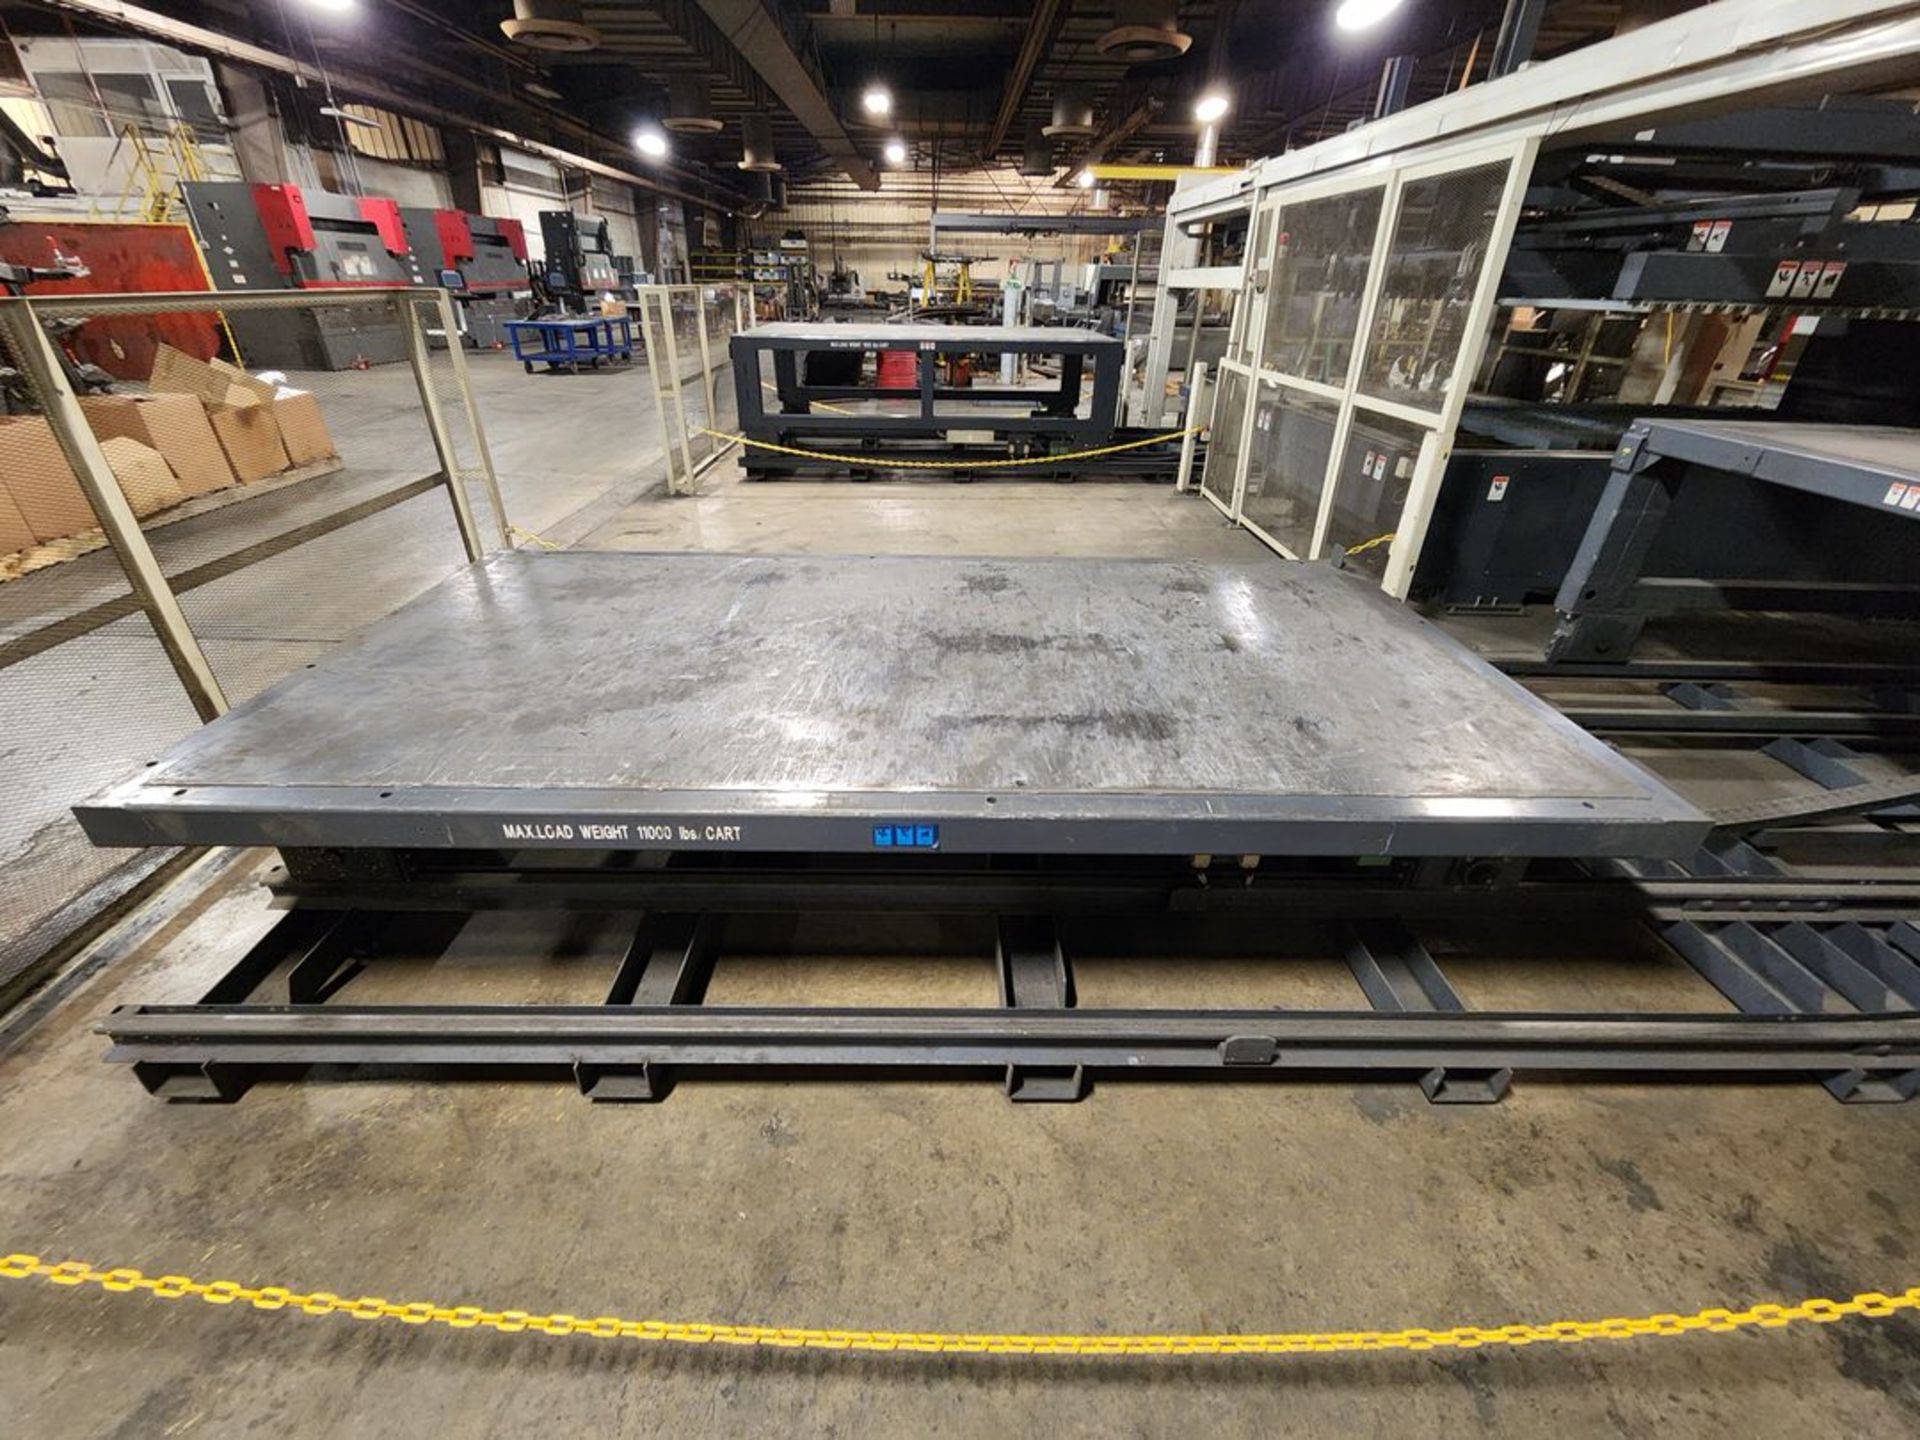 2016 MITSUBISHI ML3015EX-F40(S) FIBER LASER, 5' X 10' WITH DUAL CART LOAD AND UNLOAD CELL - Image 31 of 81